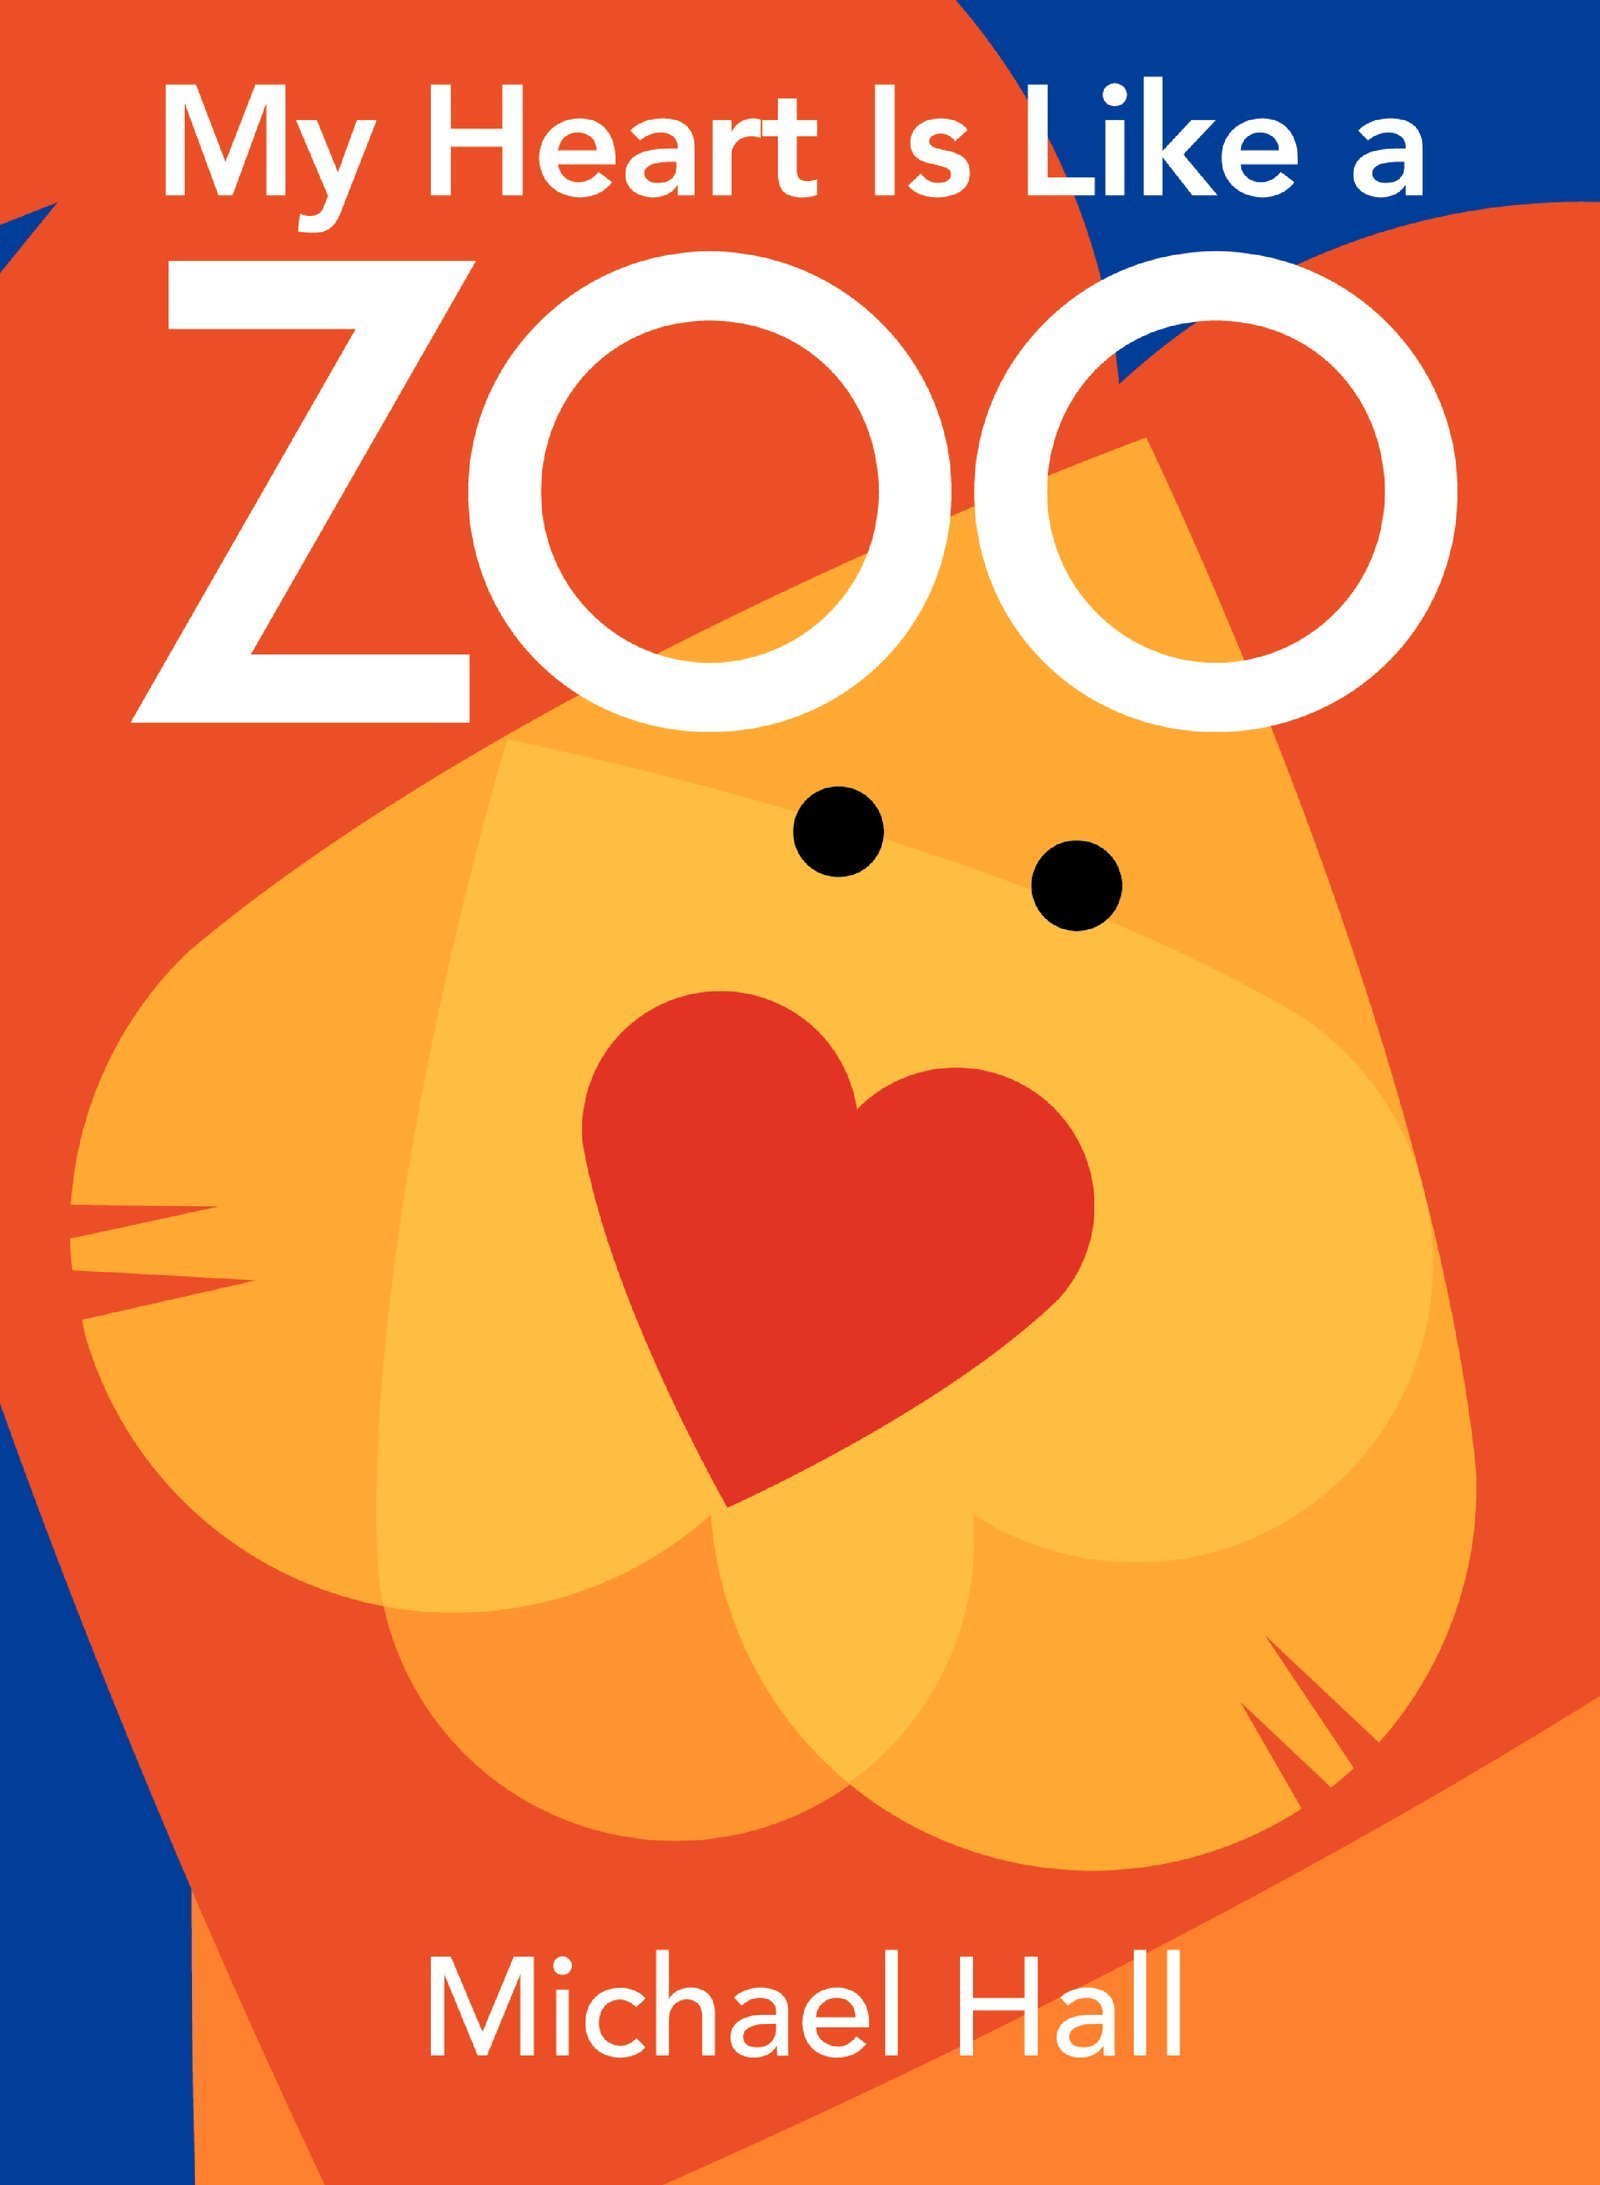 best toddler books, my heart is like zoo